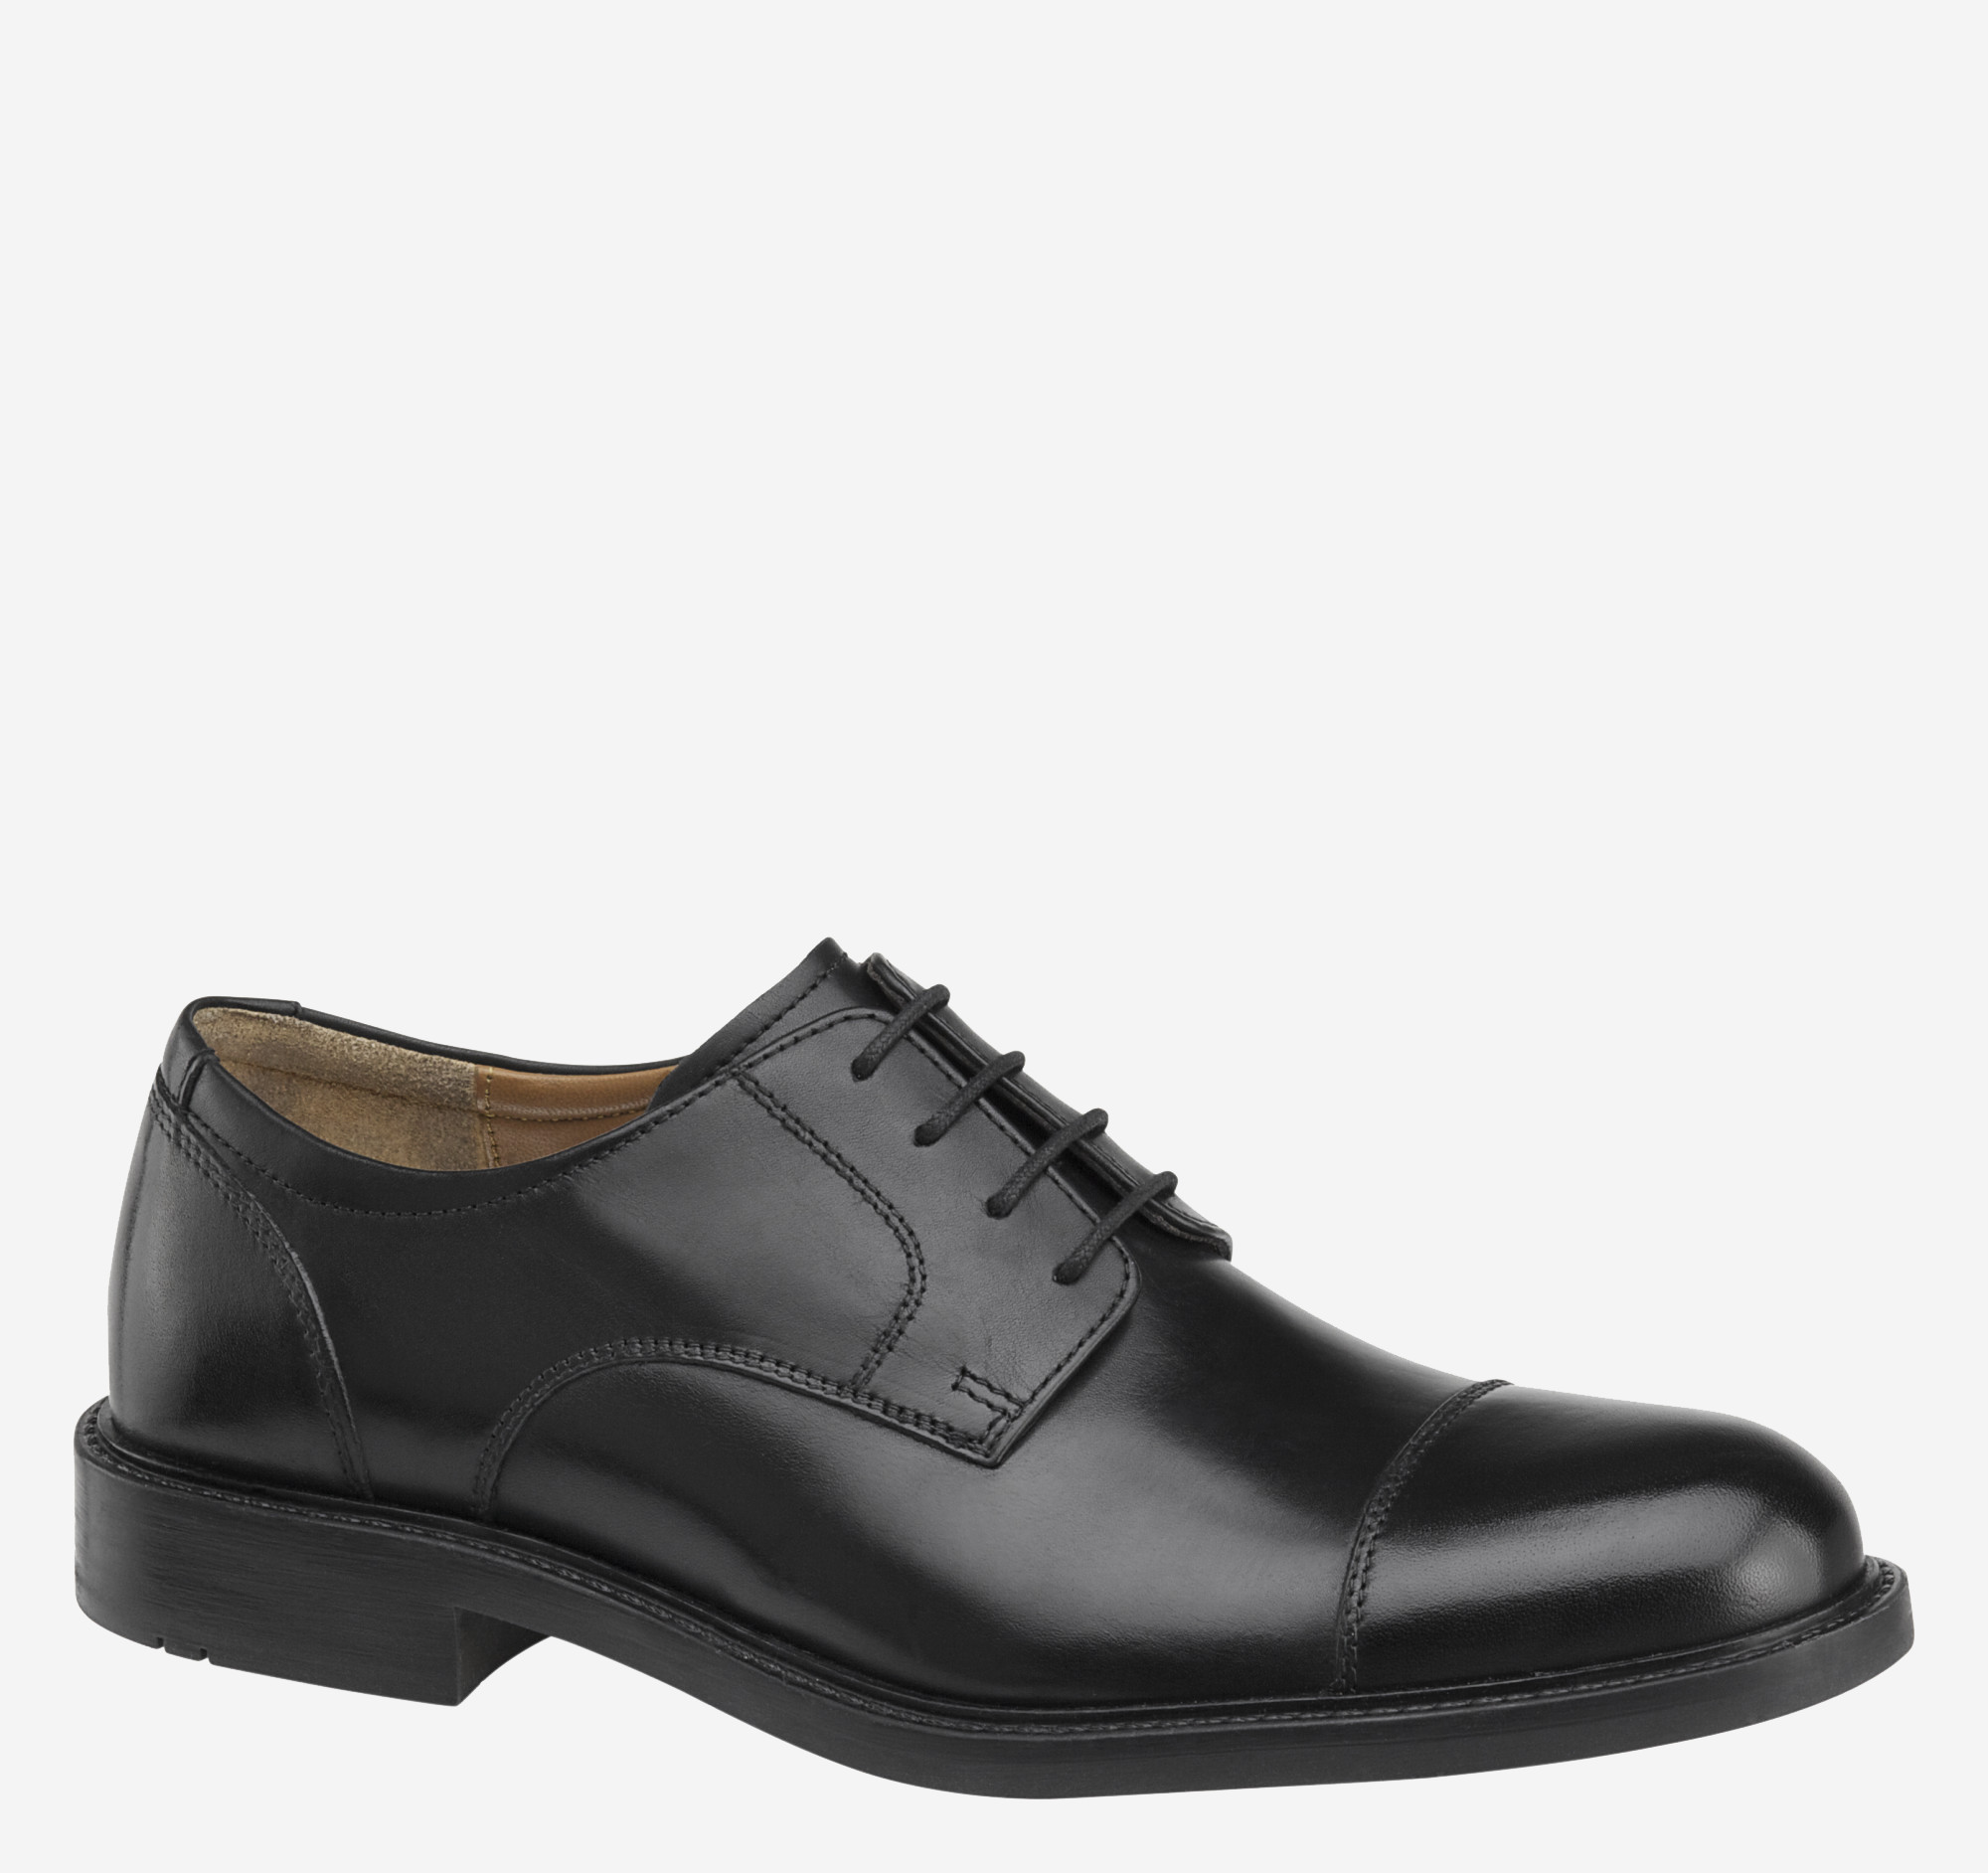 johnston and murphy slip on dress shoes